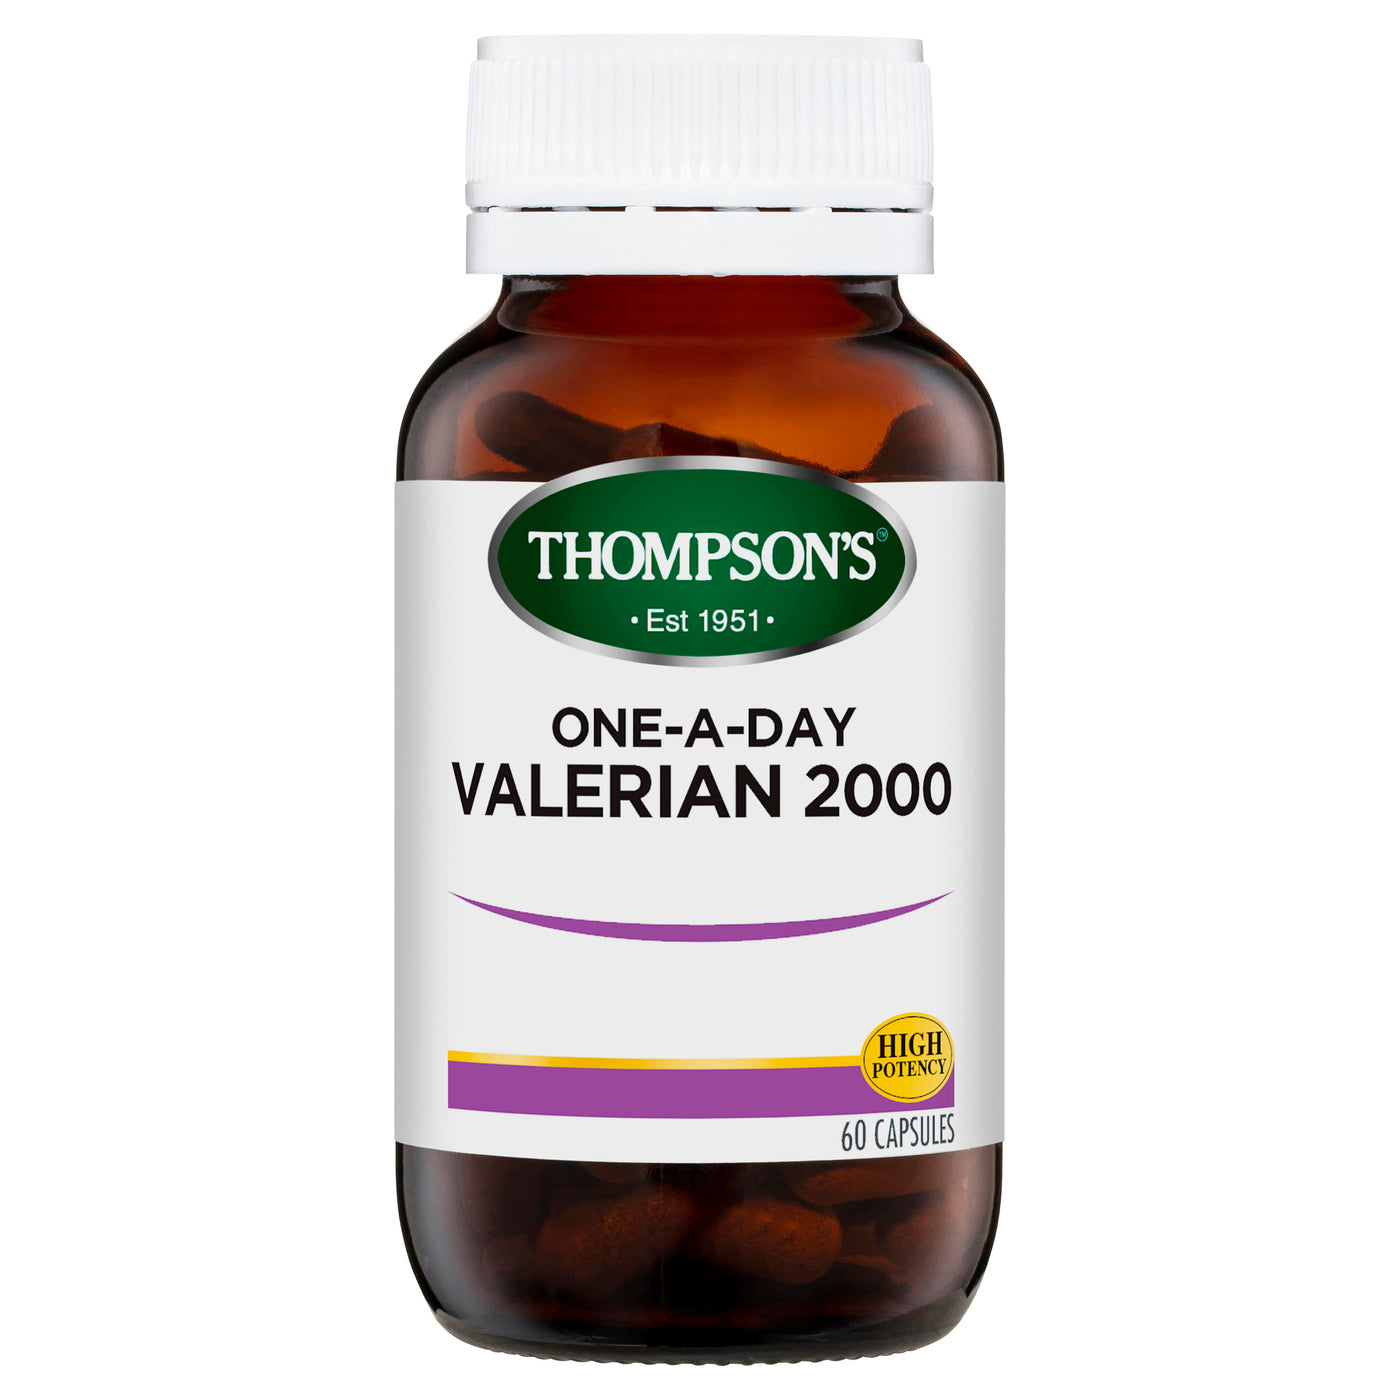 Thompsons 1 a day Valerian 60 capsules